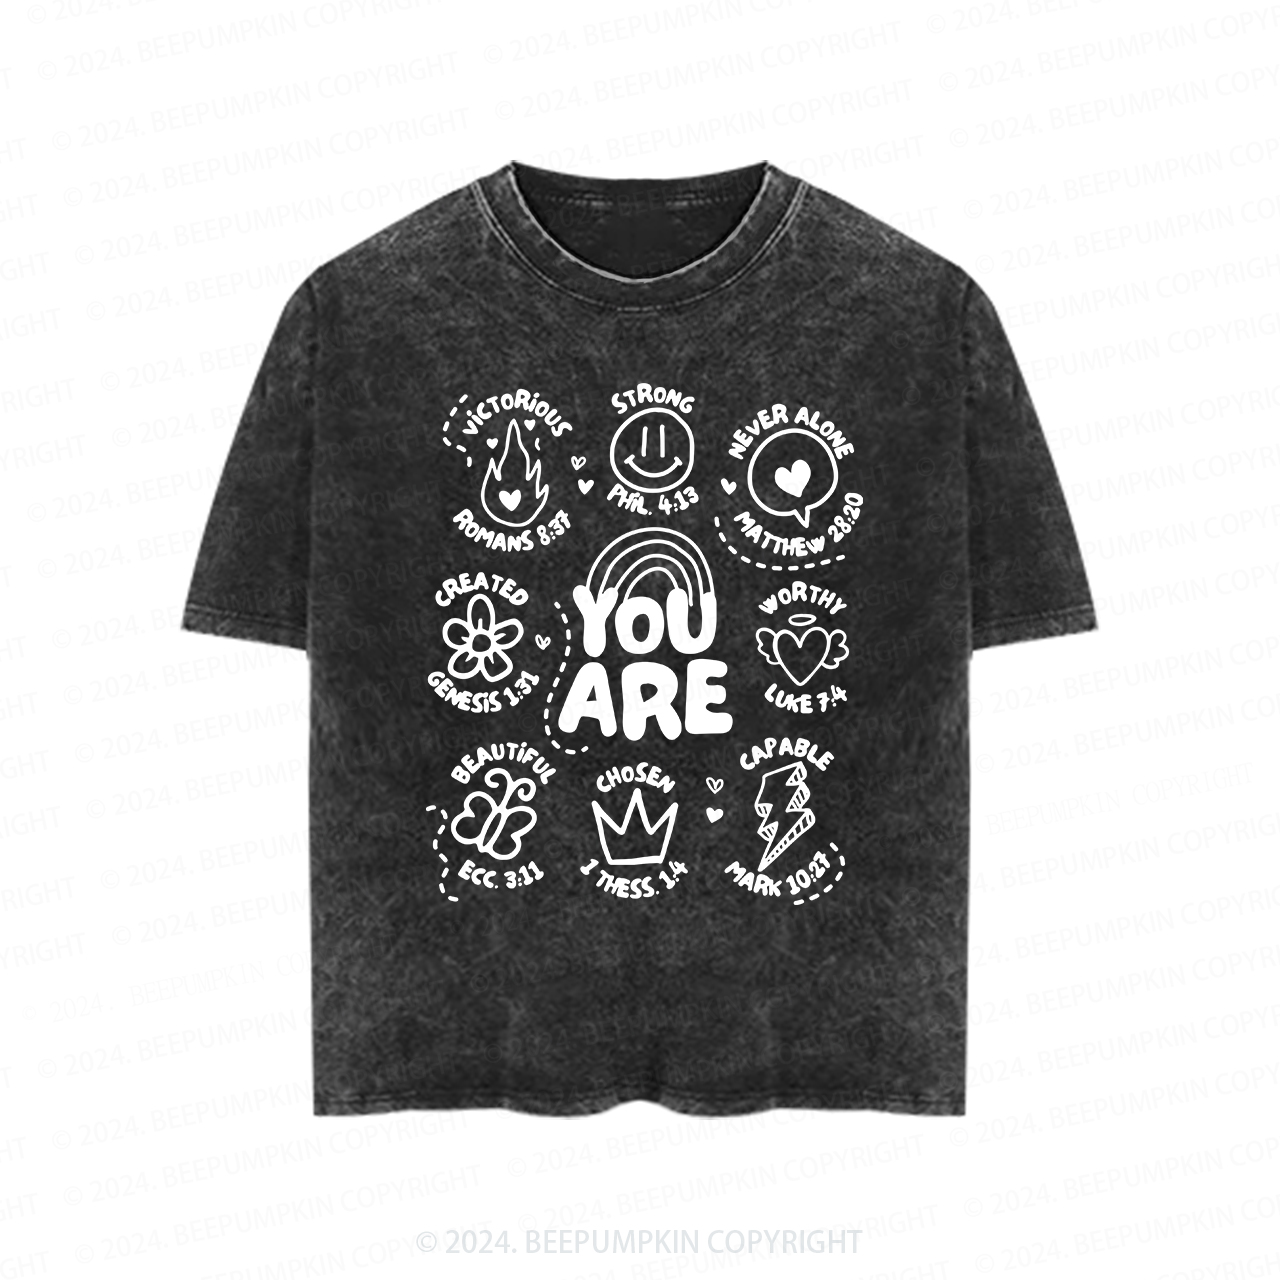 God Says You Are Kids Toddler&Kids Washed Tees       